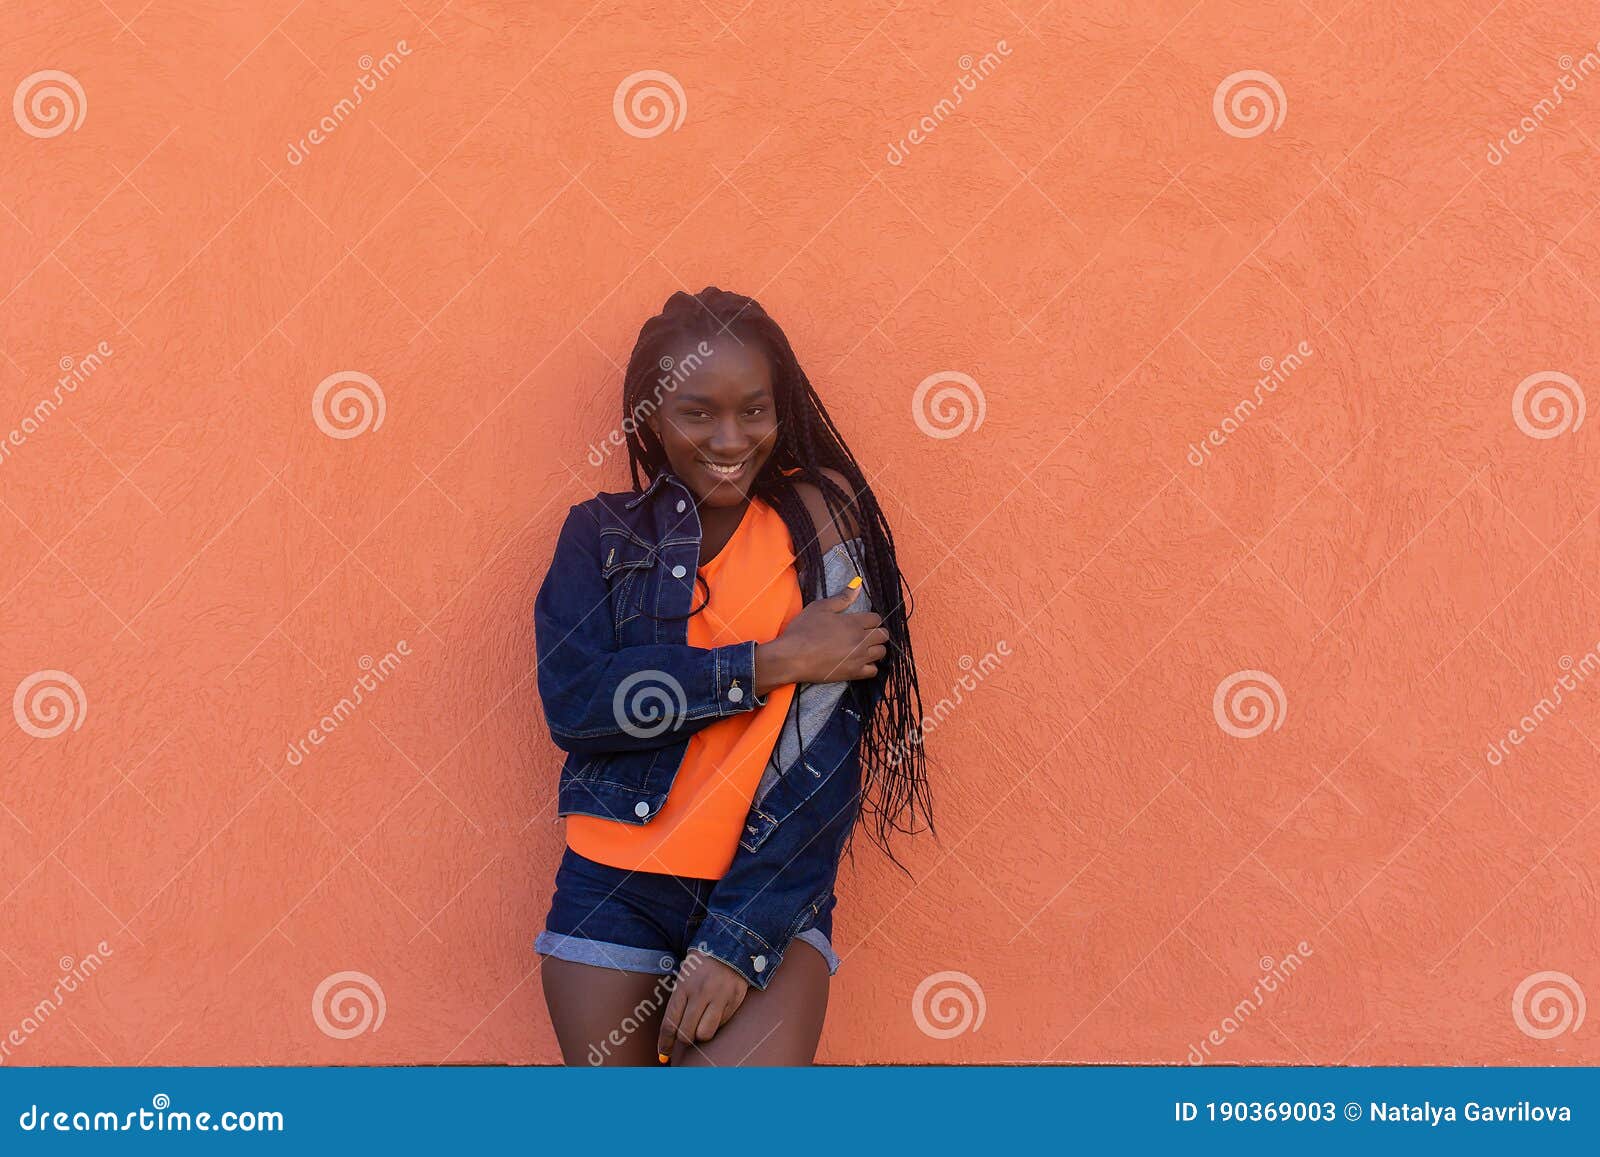 Beautiful Girl with African American Pigtails Stock Image - Image of ...